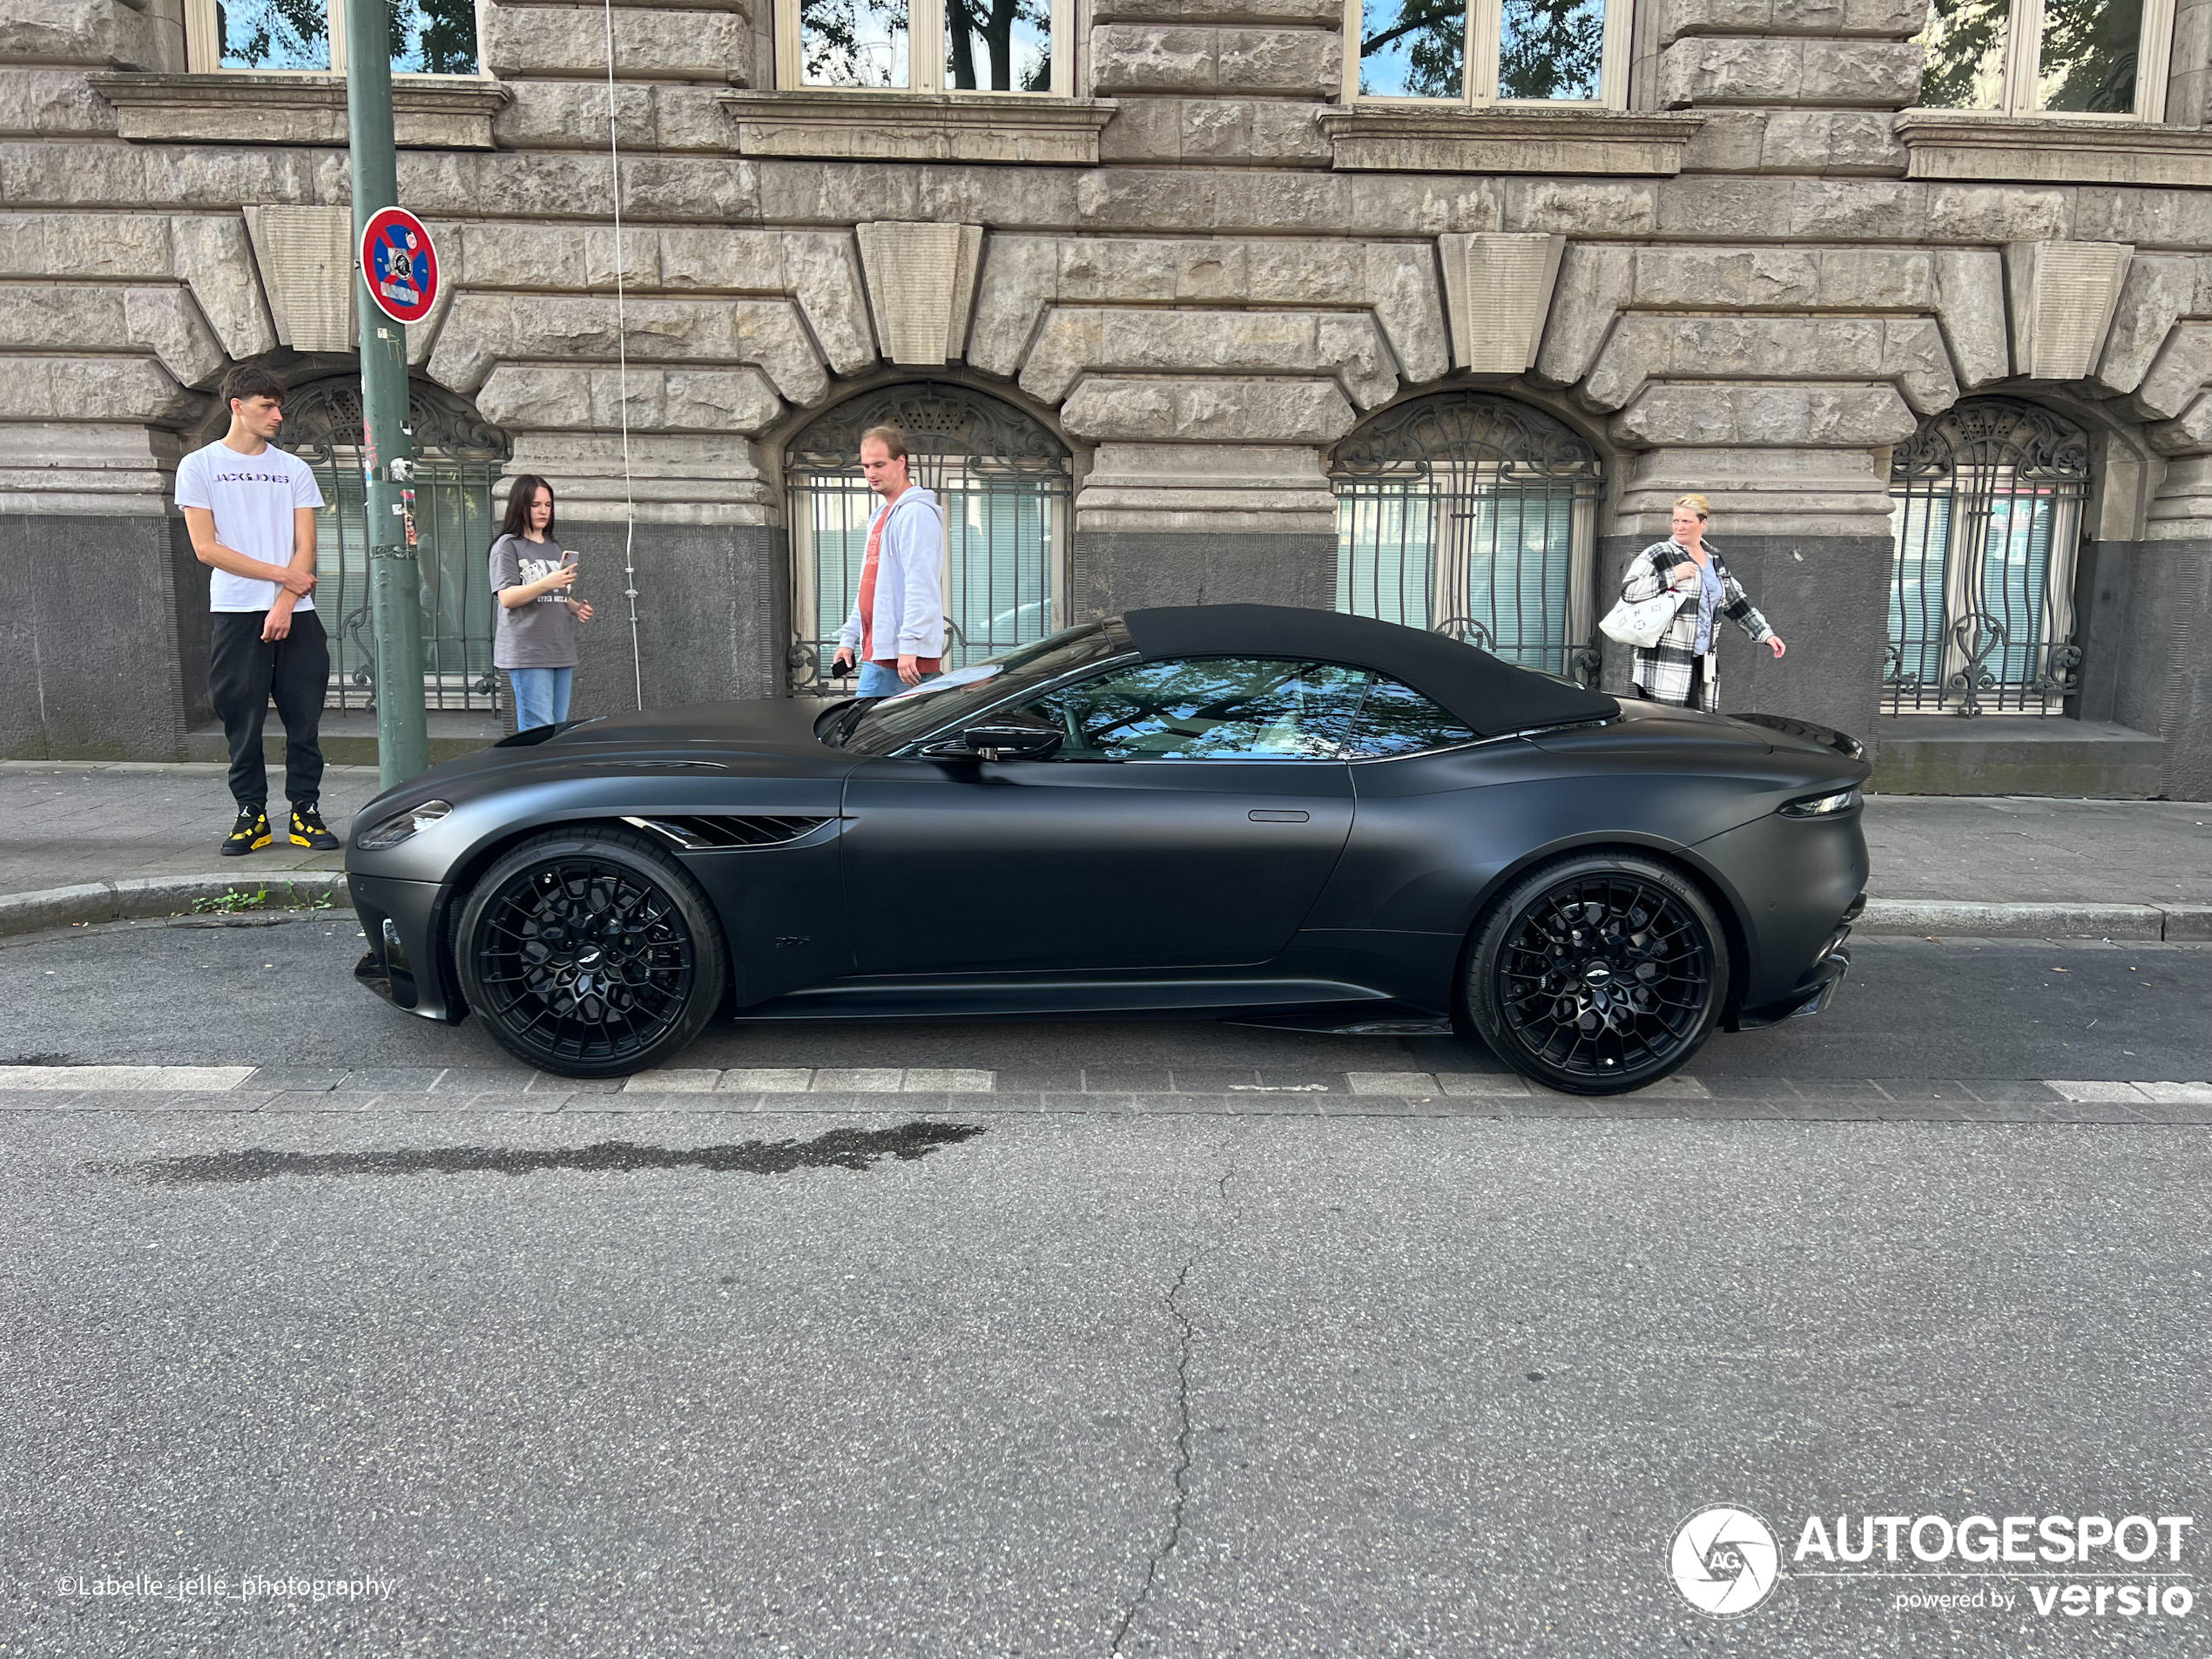 The very first Aston Martin DBS 770 Ultimate Volante Shows up in Düsseldorf, Germany